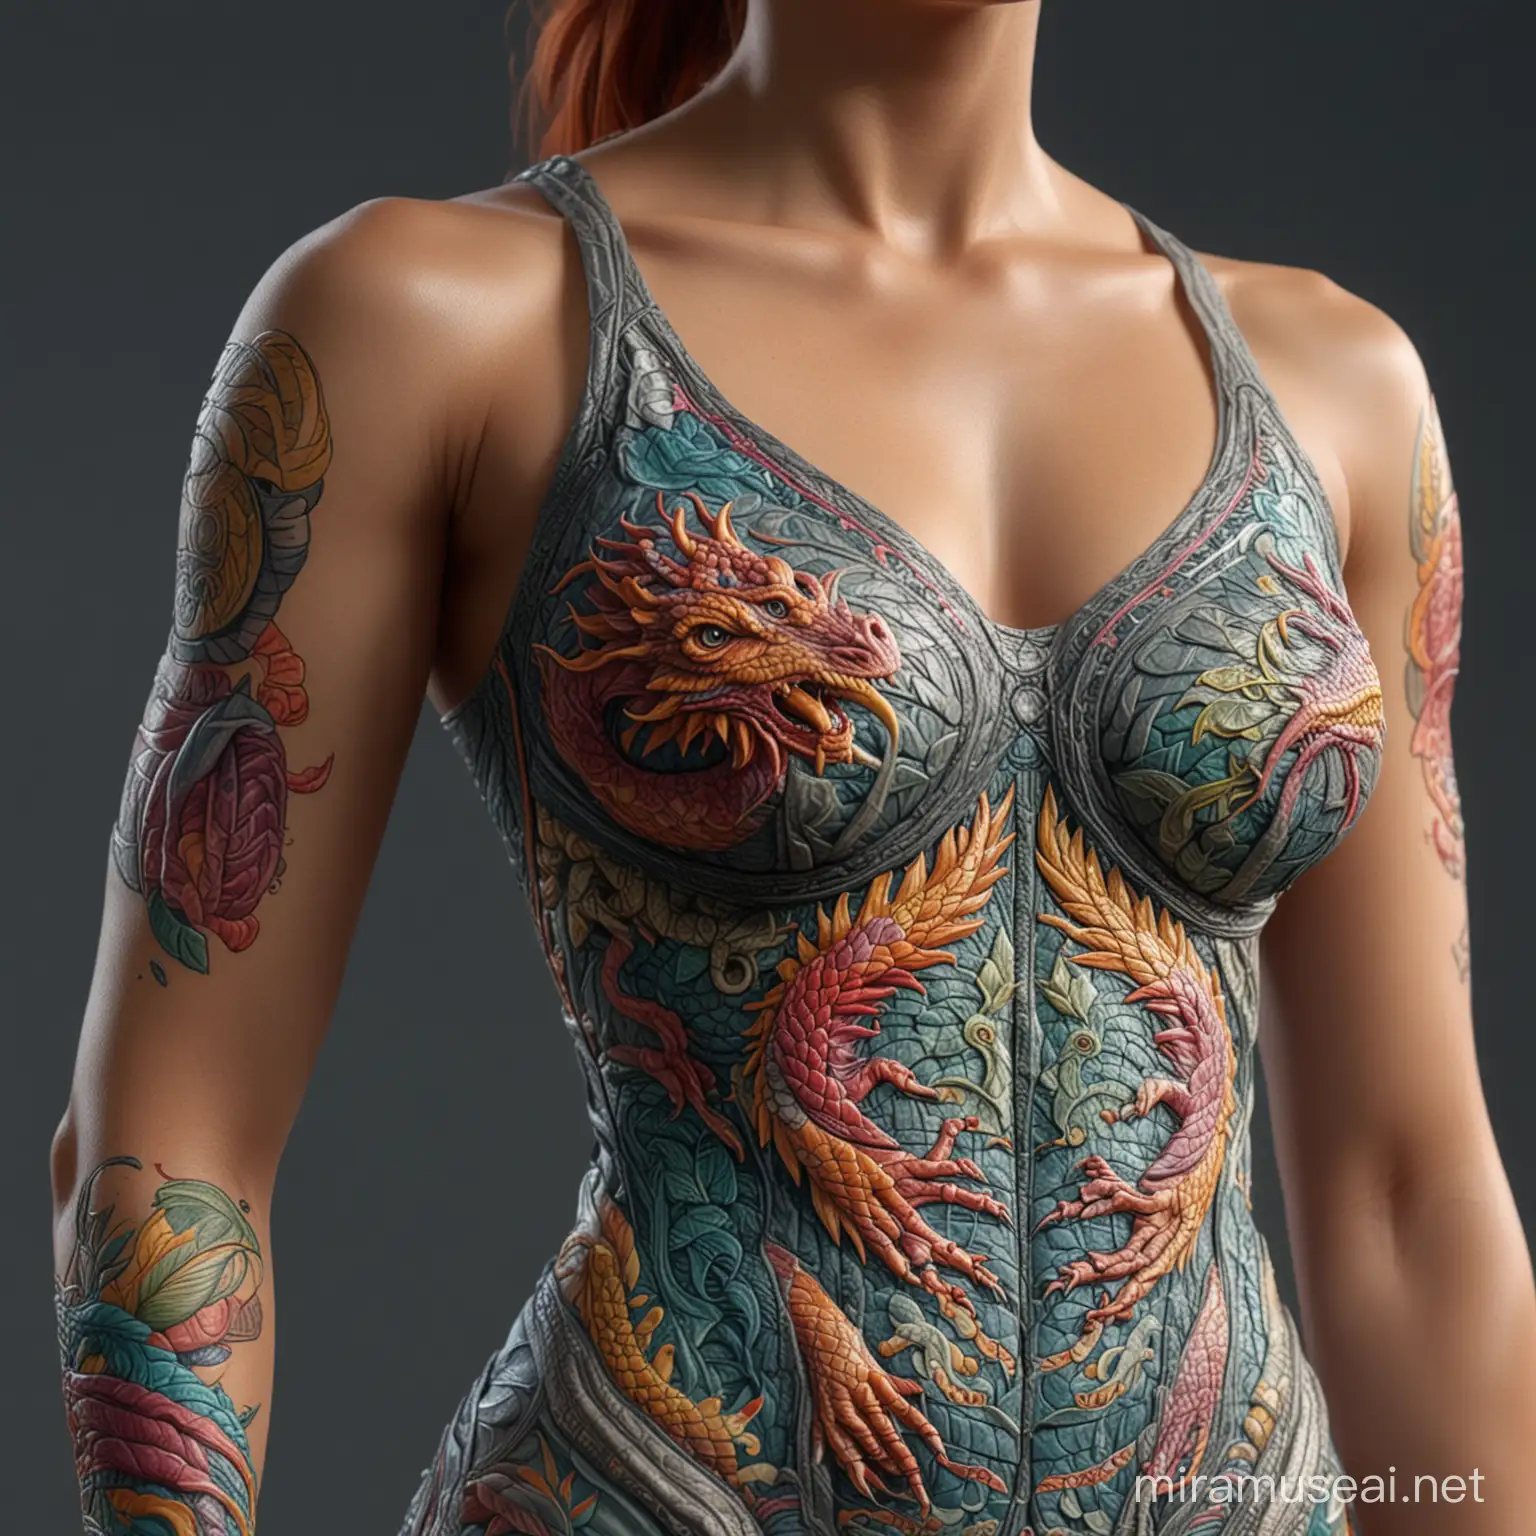 Ultrarealistic Female Human with Colorful Draconic Symbols in Summer Dress